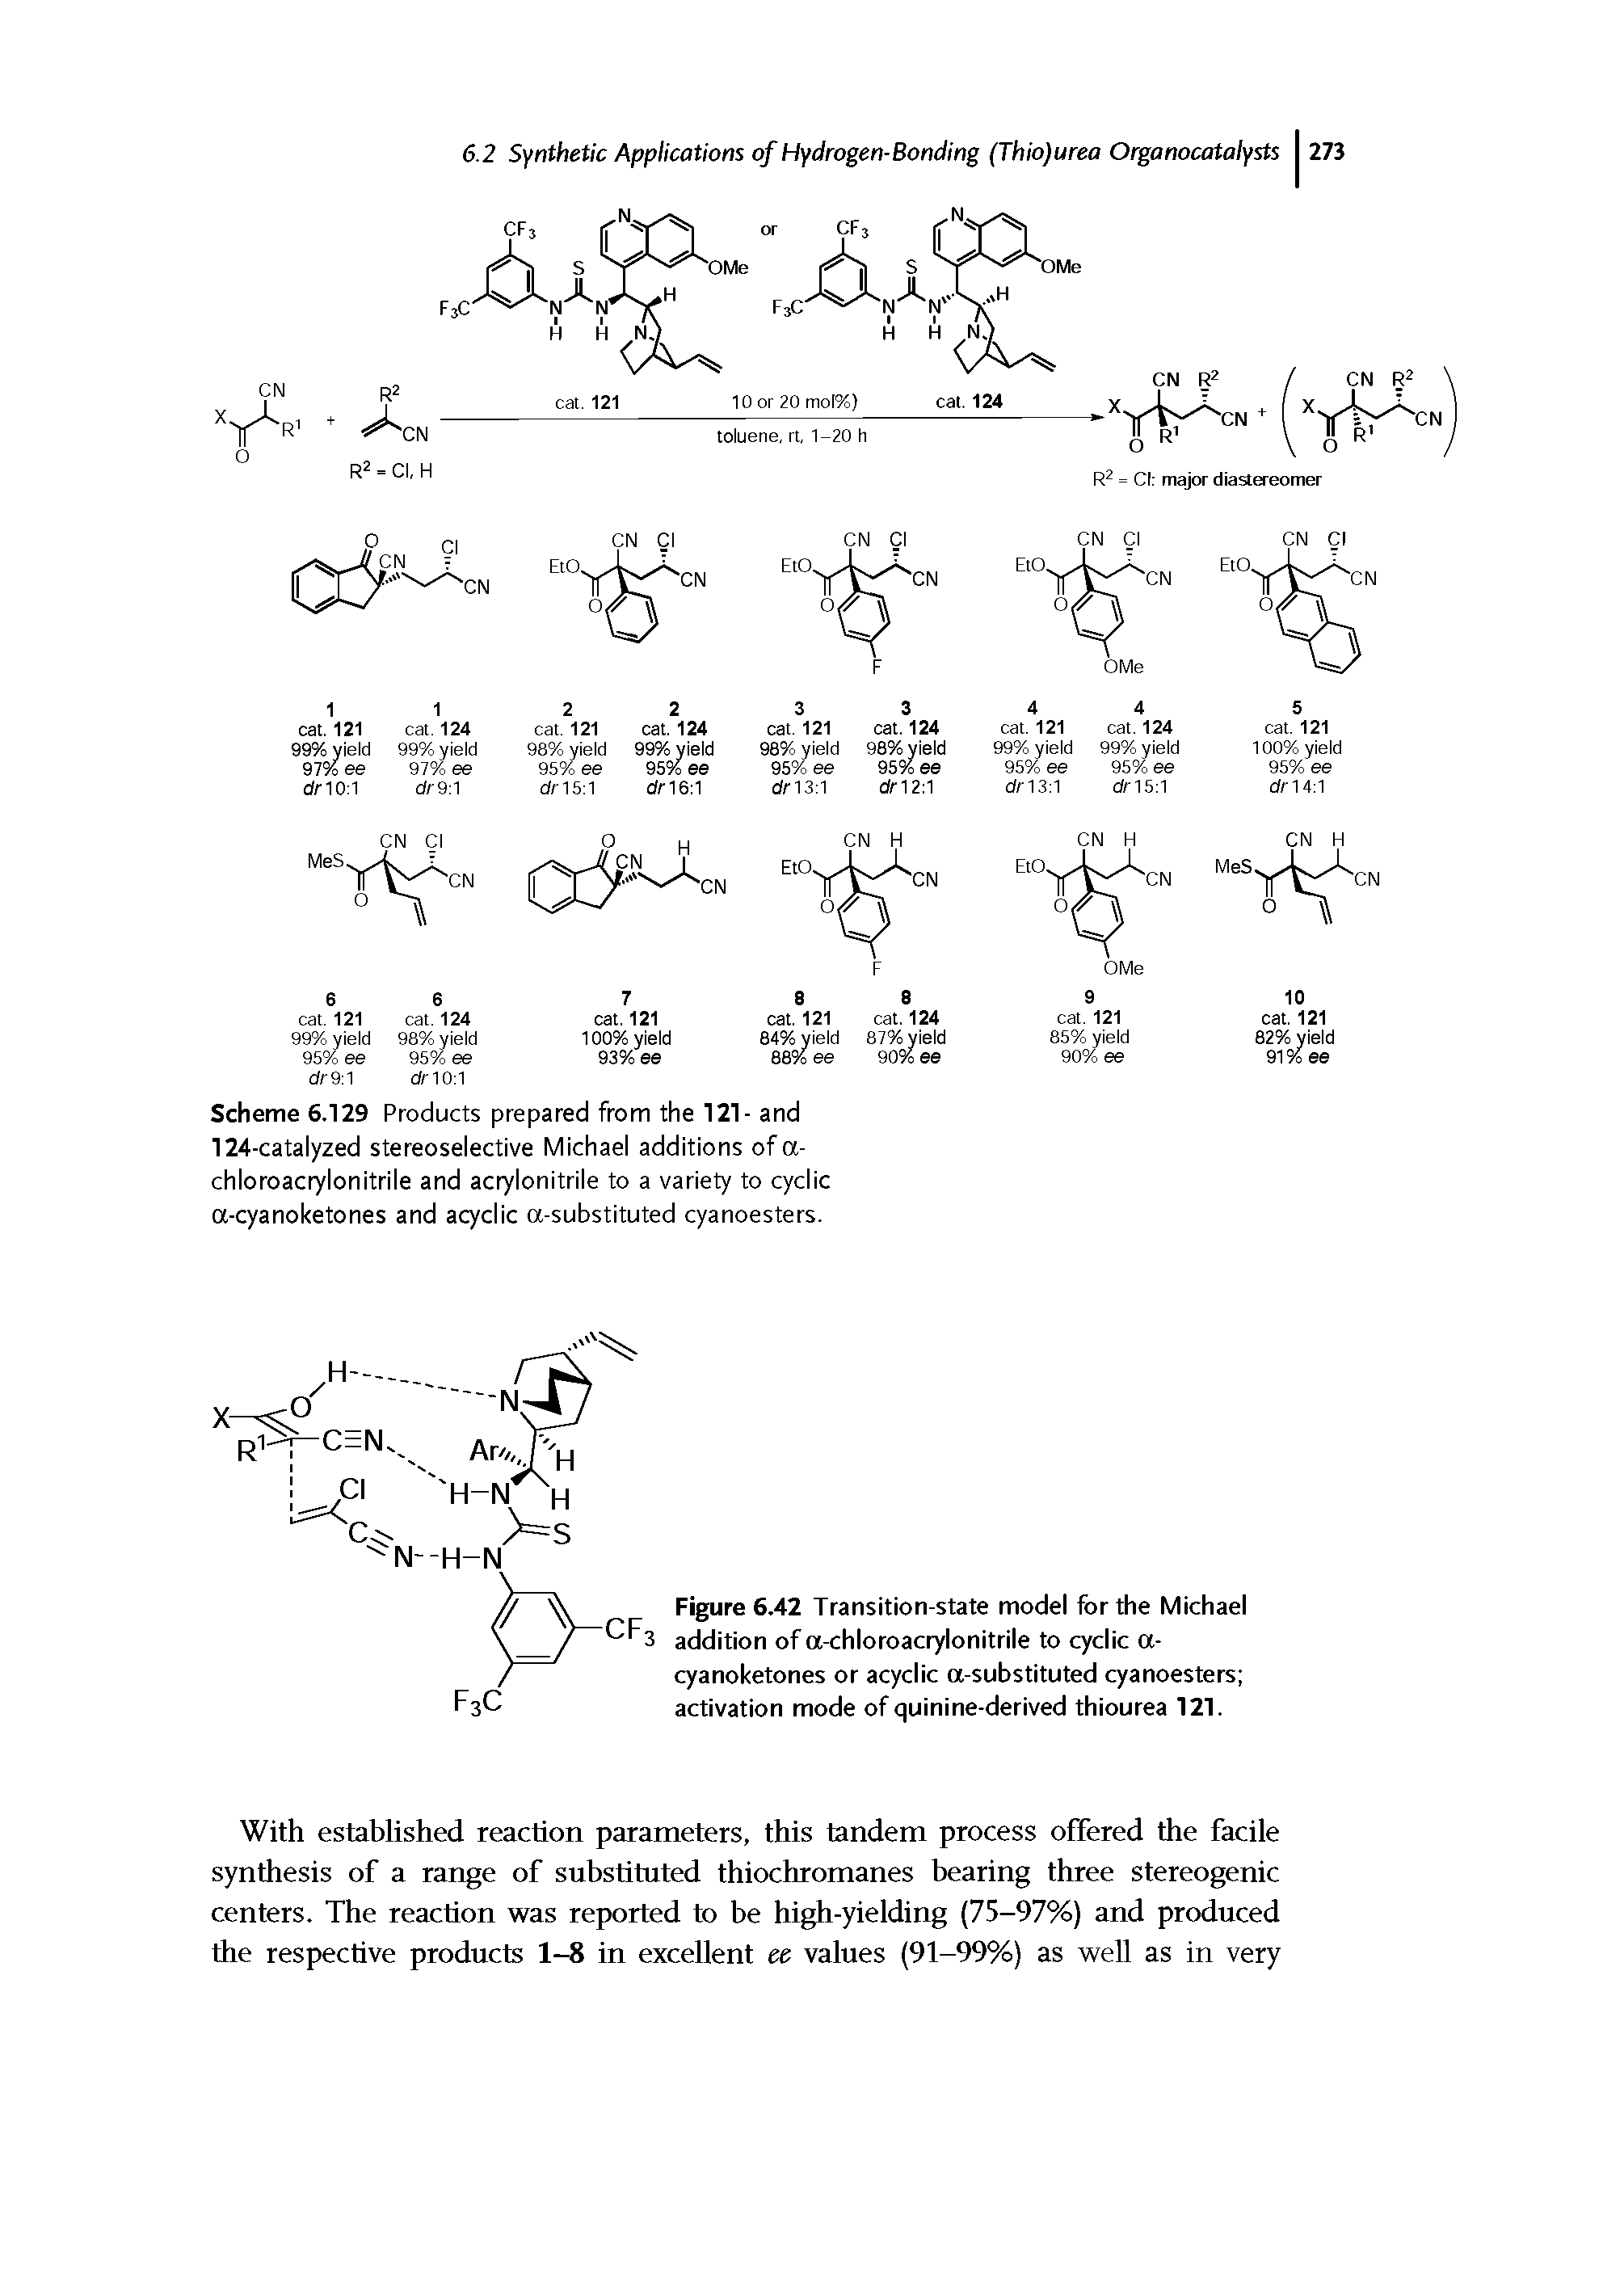 Scheme 6.129 Products prepared from the 121- and 124-catalyzed stereoselective Michael additions of a-chloroacrylonitrile and acrylonitrile to a variety to cyclic a-cyanoketones and acyclic a-substituted cyanoesters.